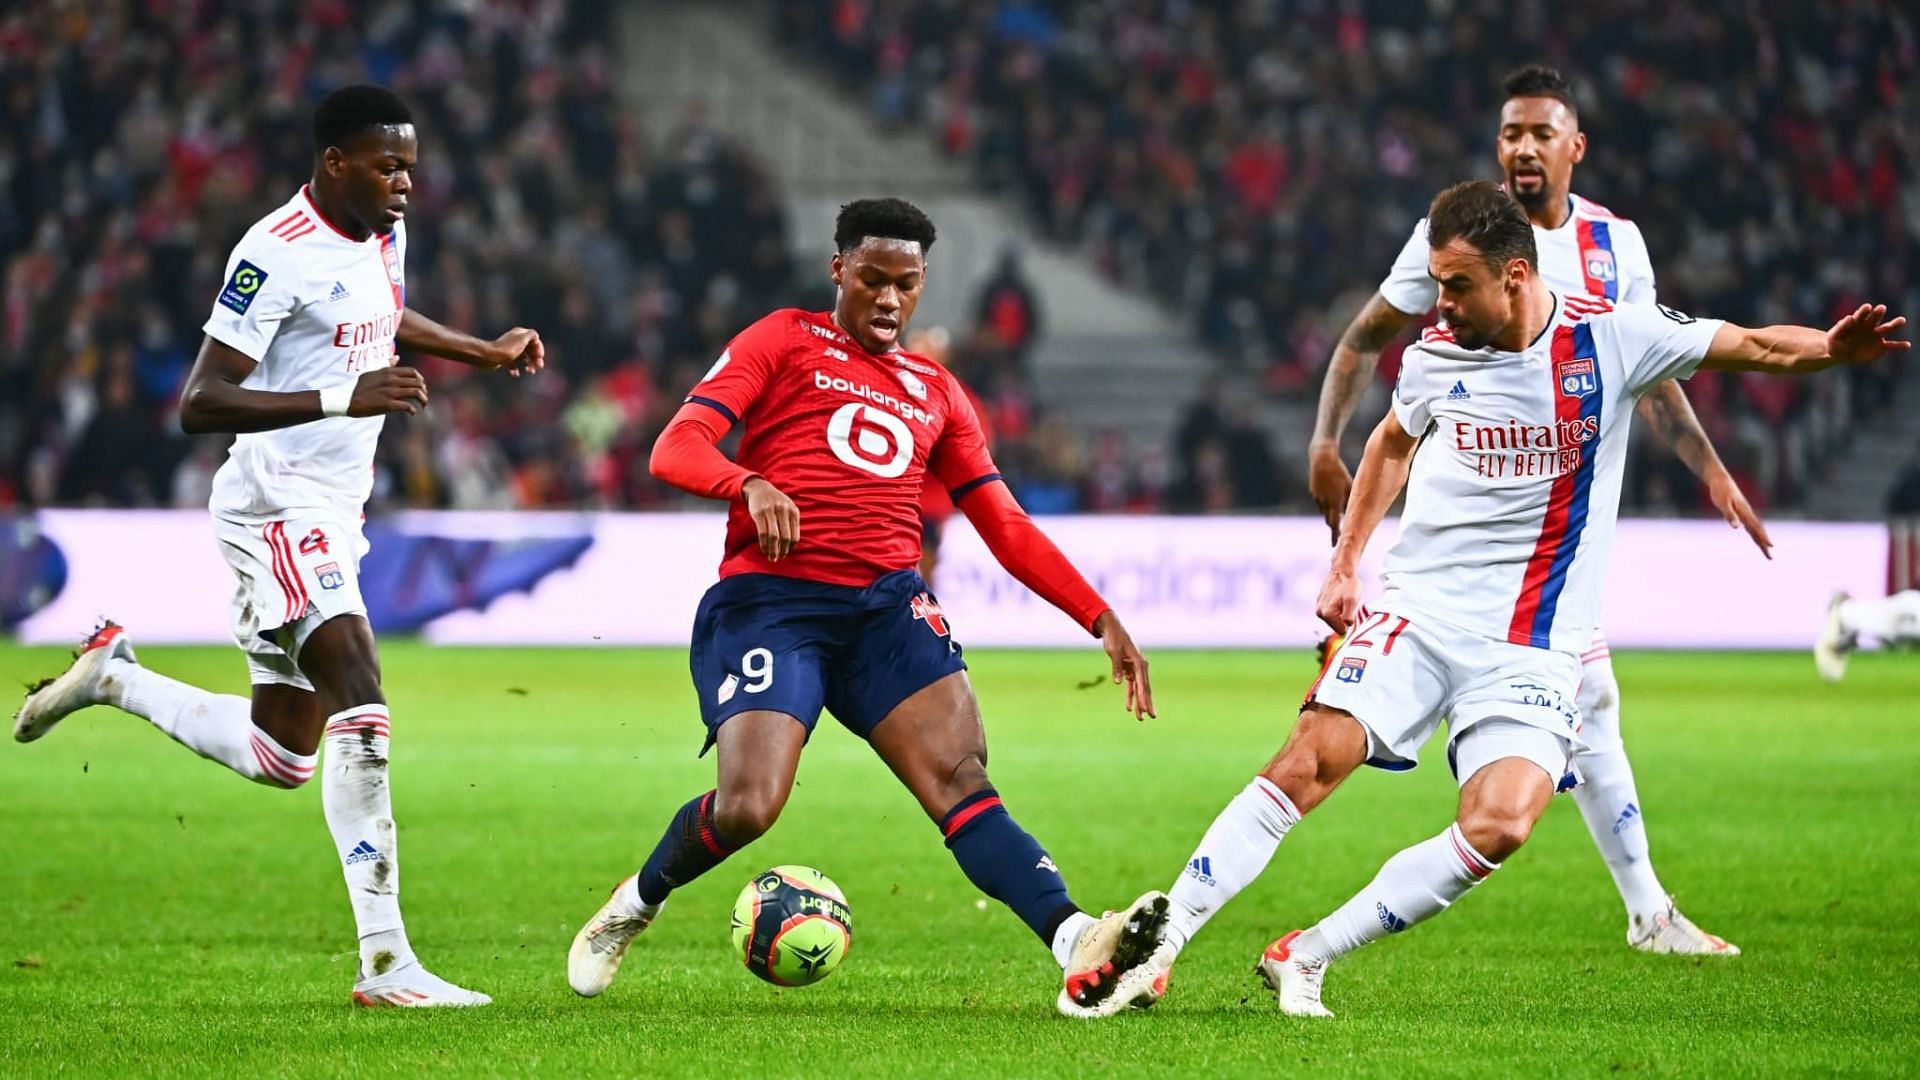 Lille take on Lyon in Ligue 1 on Friday